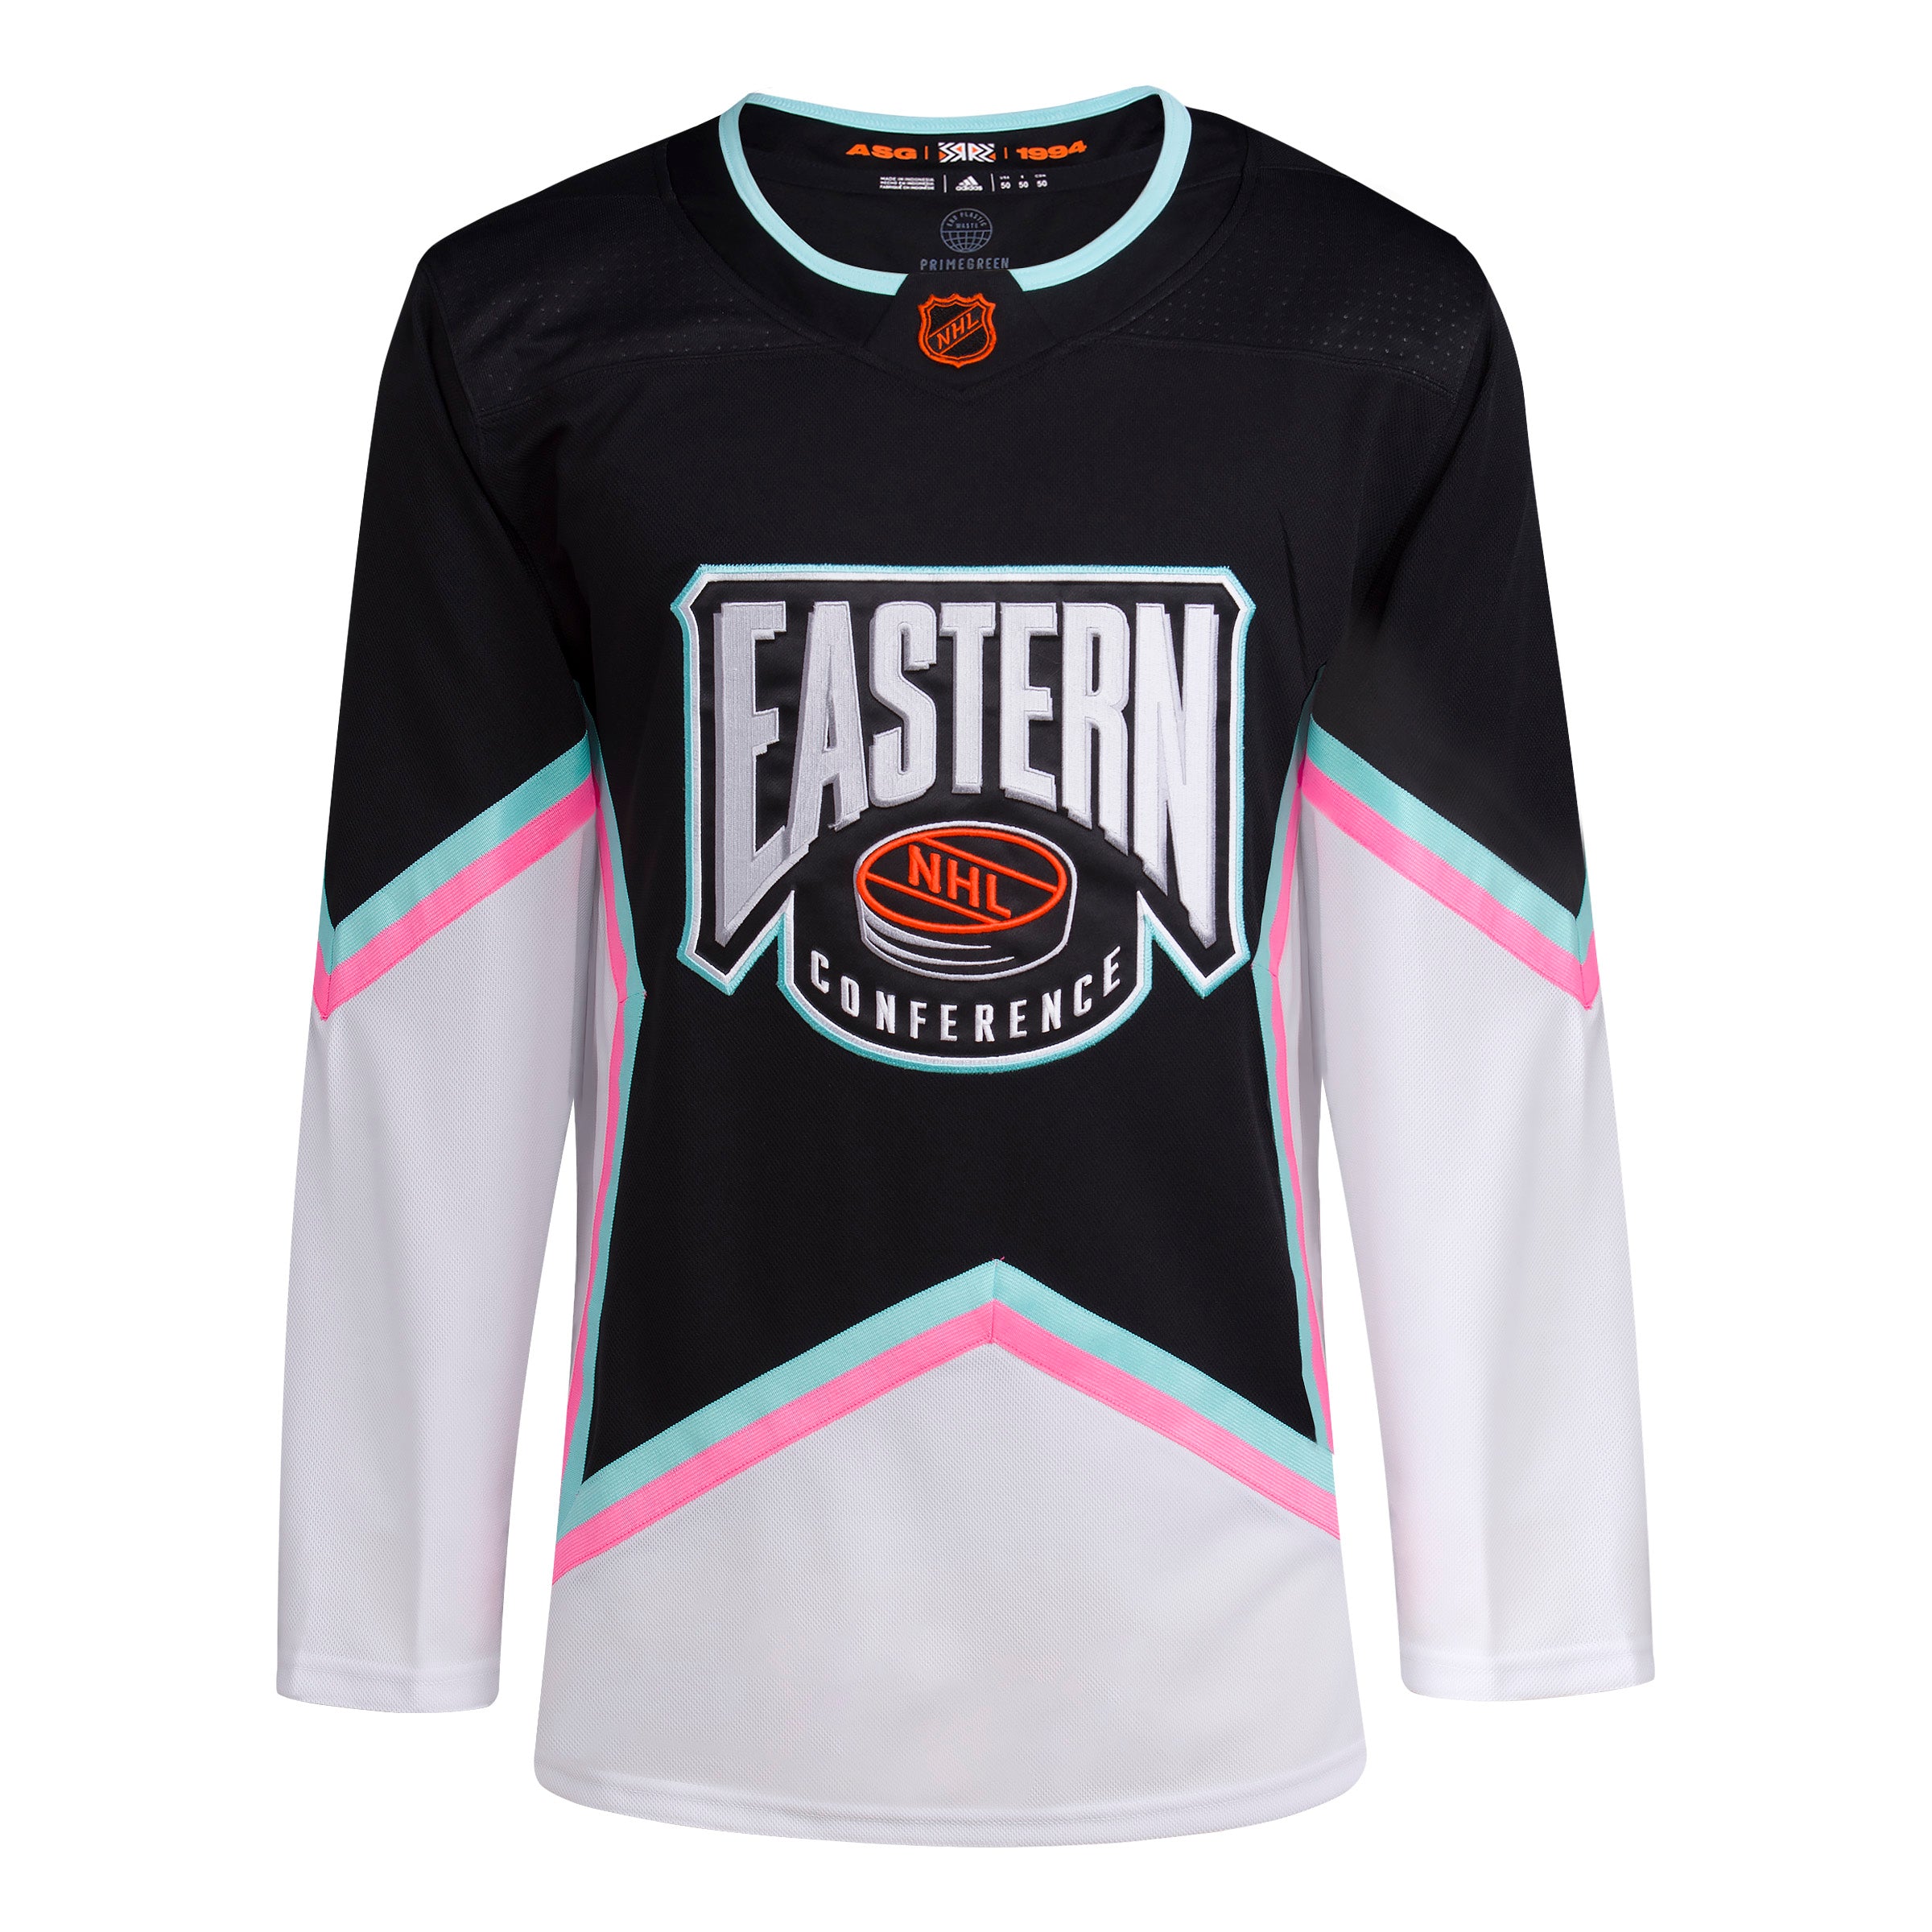 Eastern Conference Gear, Eastern Conference Jerseys, Store, Apparel